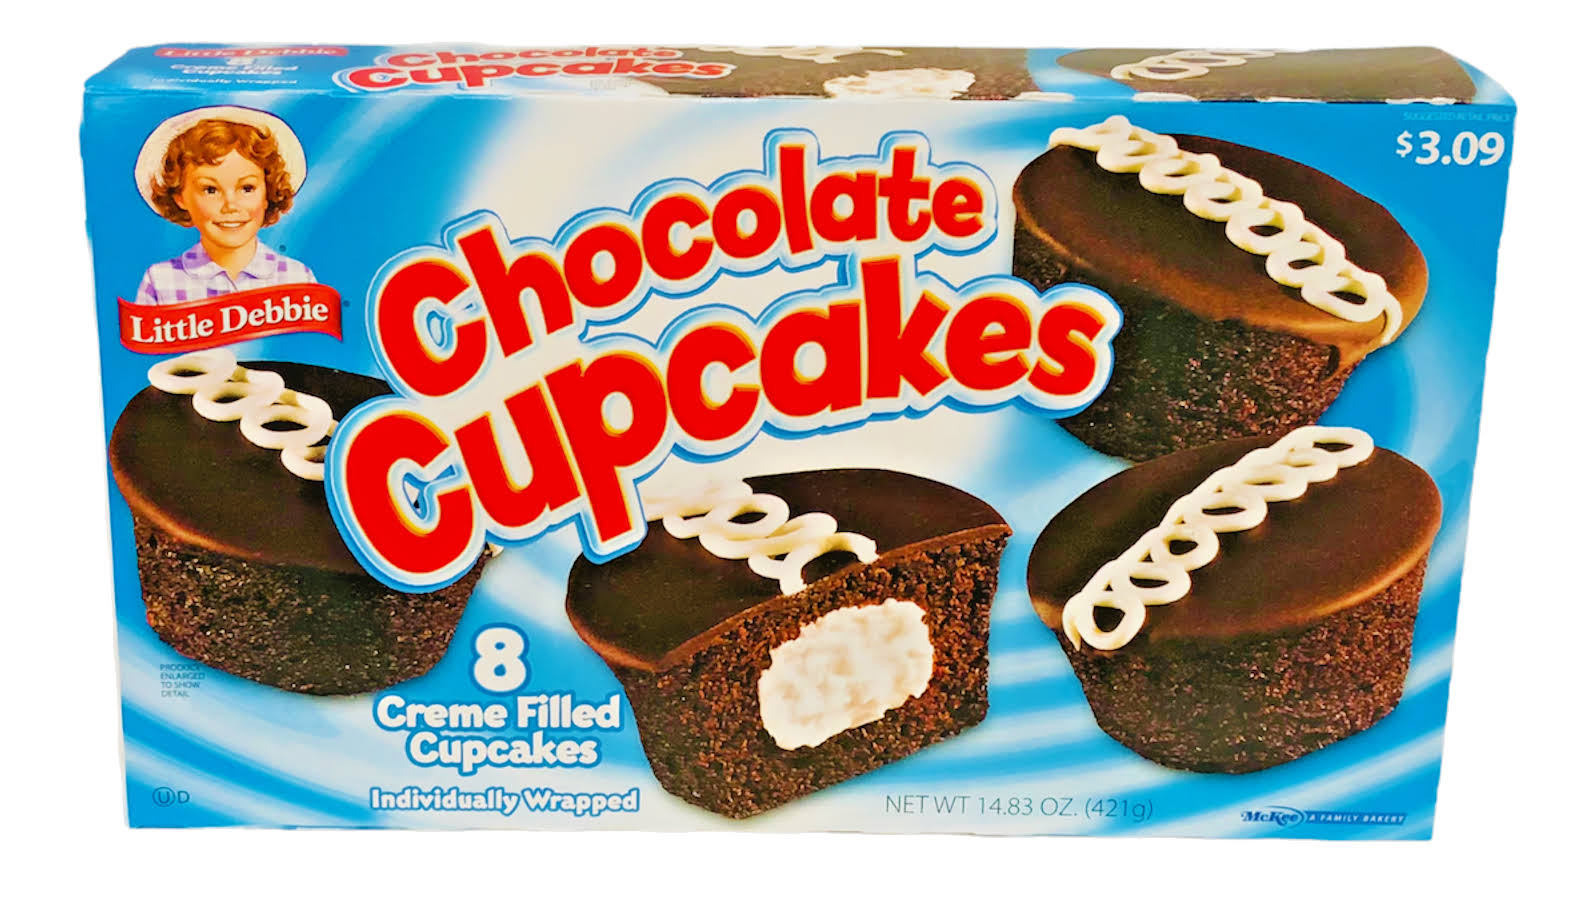 Little Debbie Chocolate Creme Filled Cupcakes - 8ct, 14.38oz